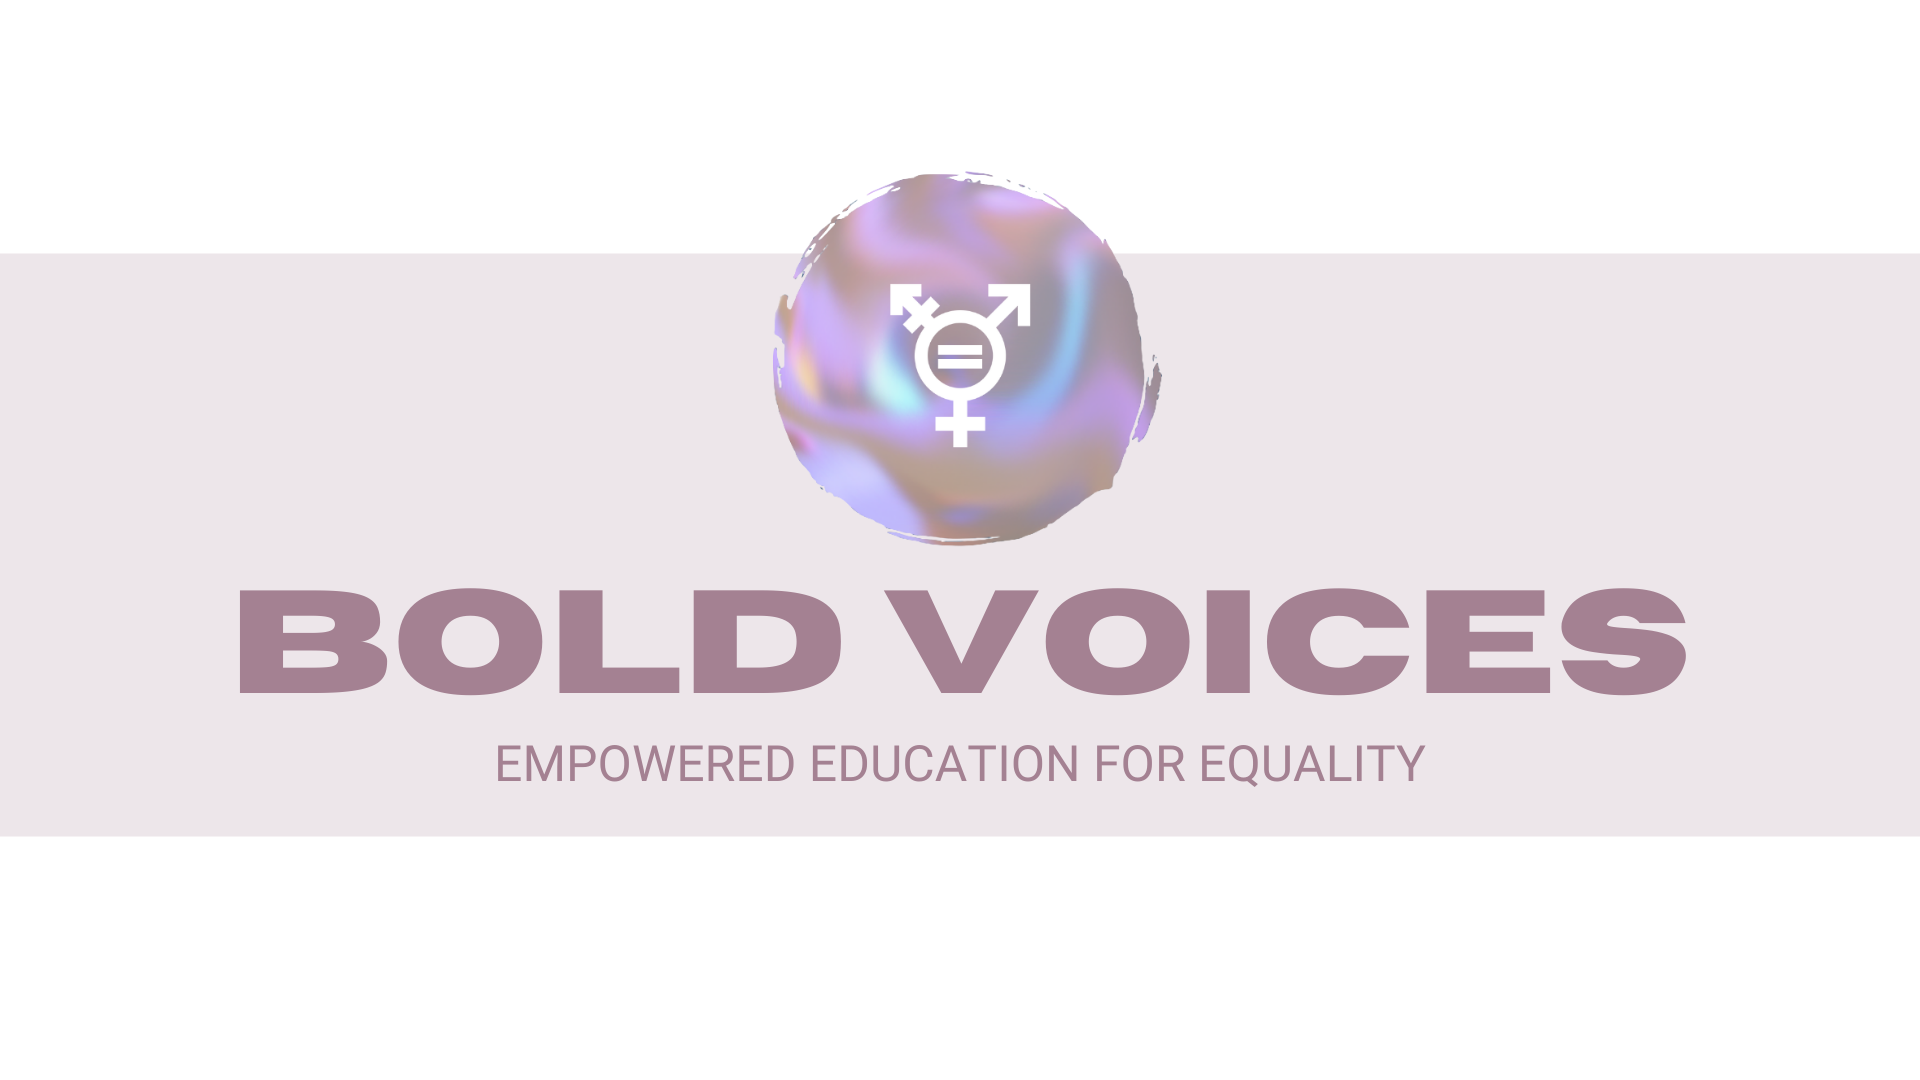 BOLD VOICES Empowered education for equality